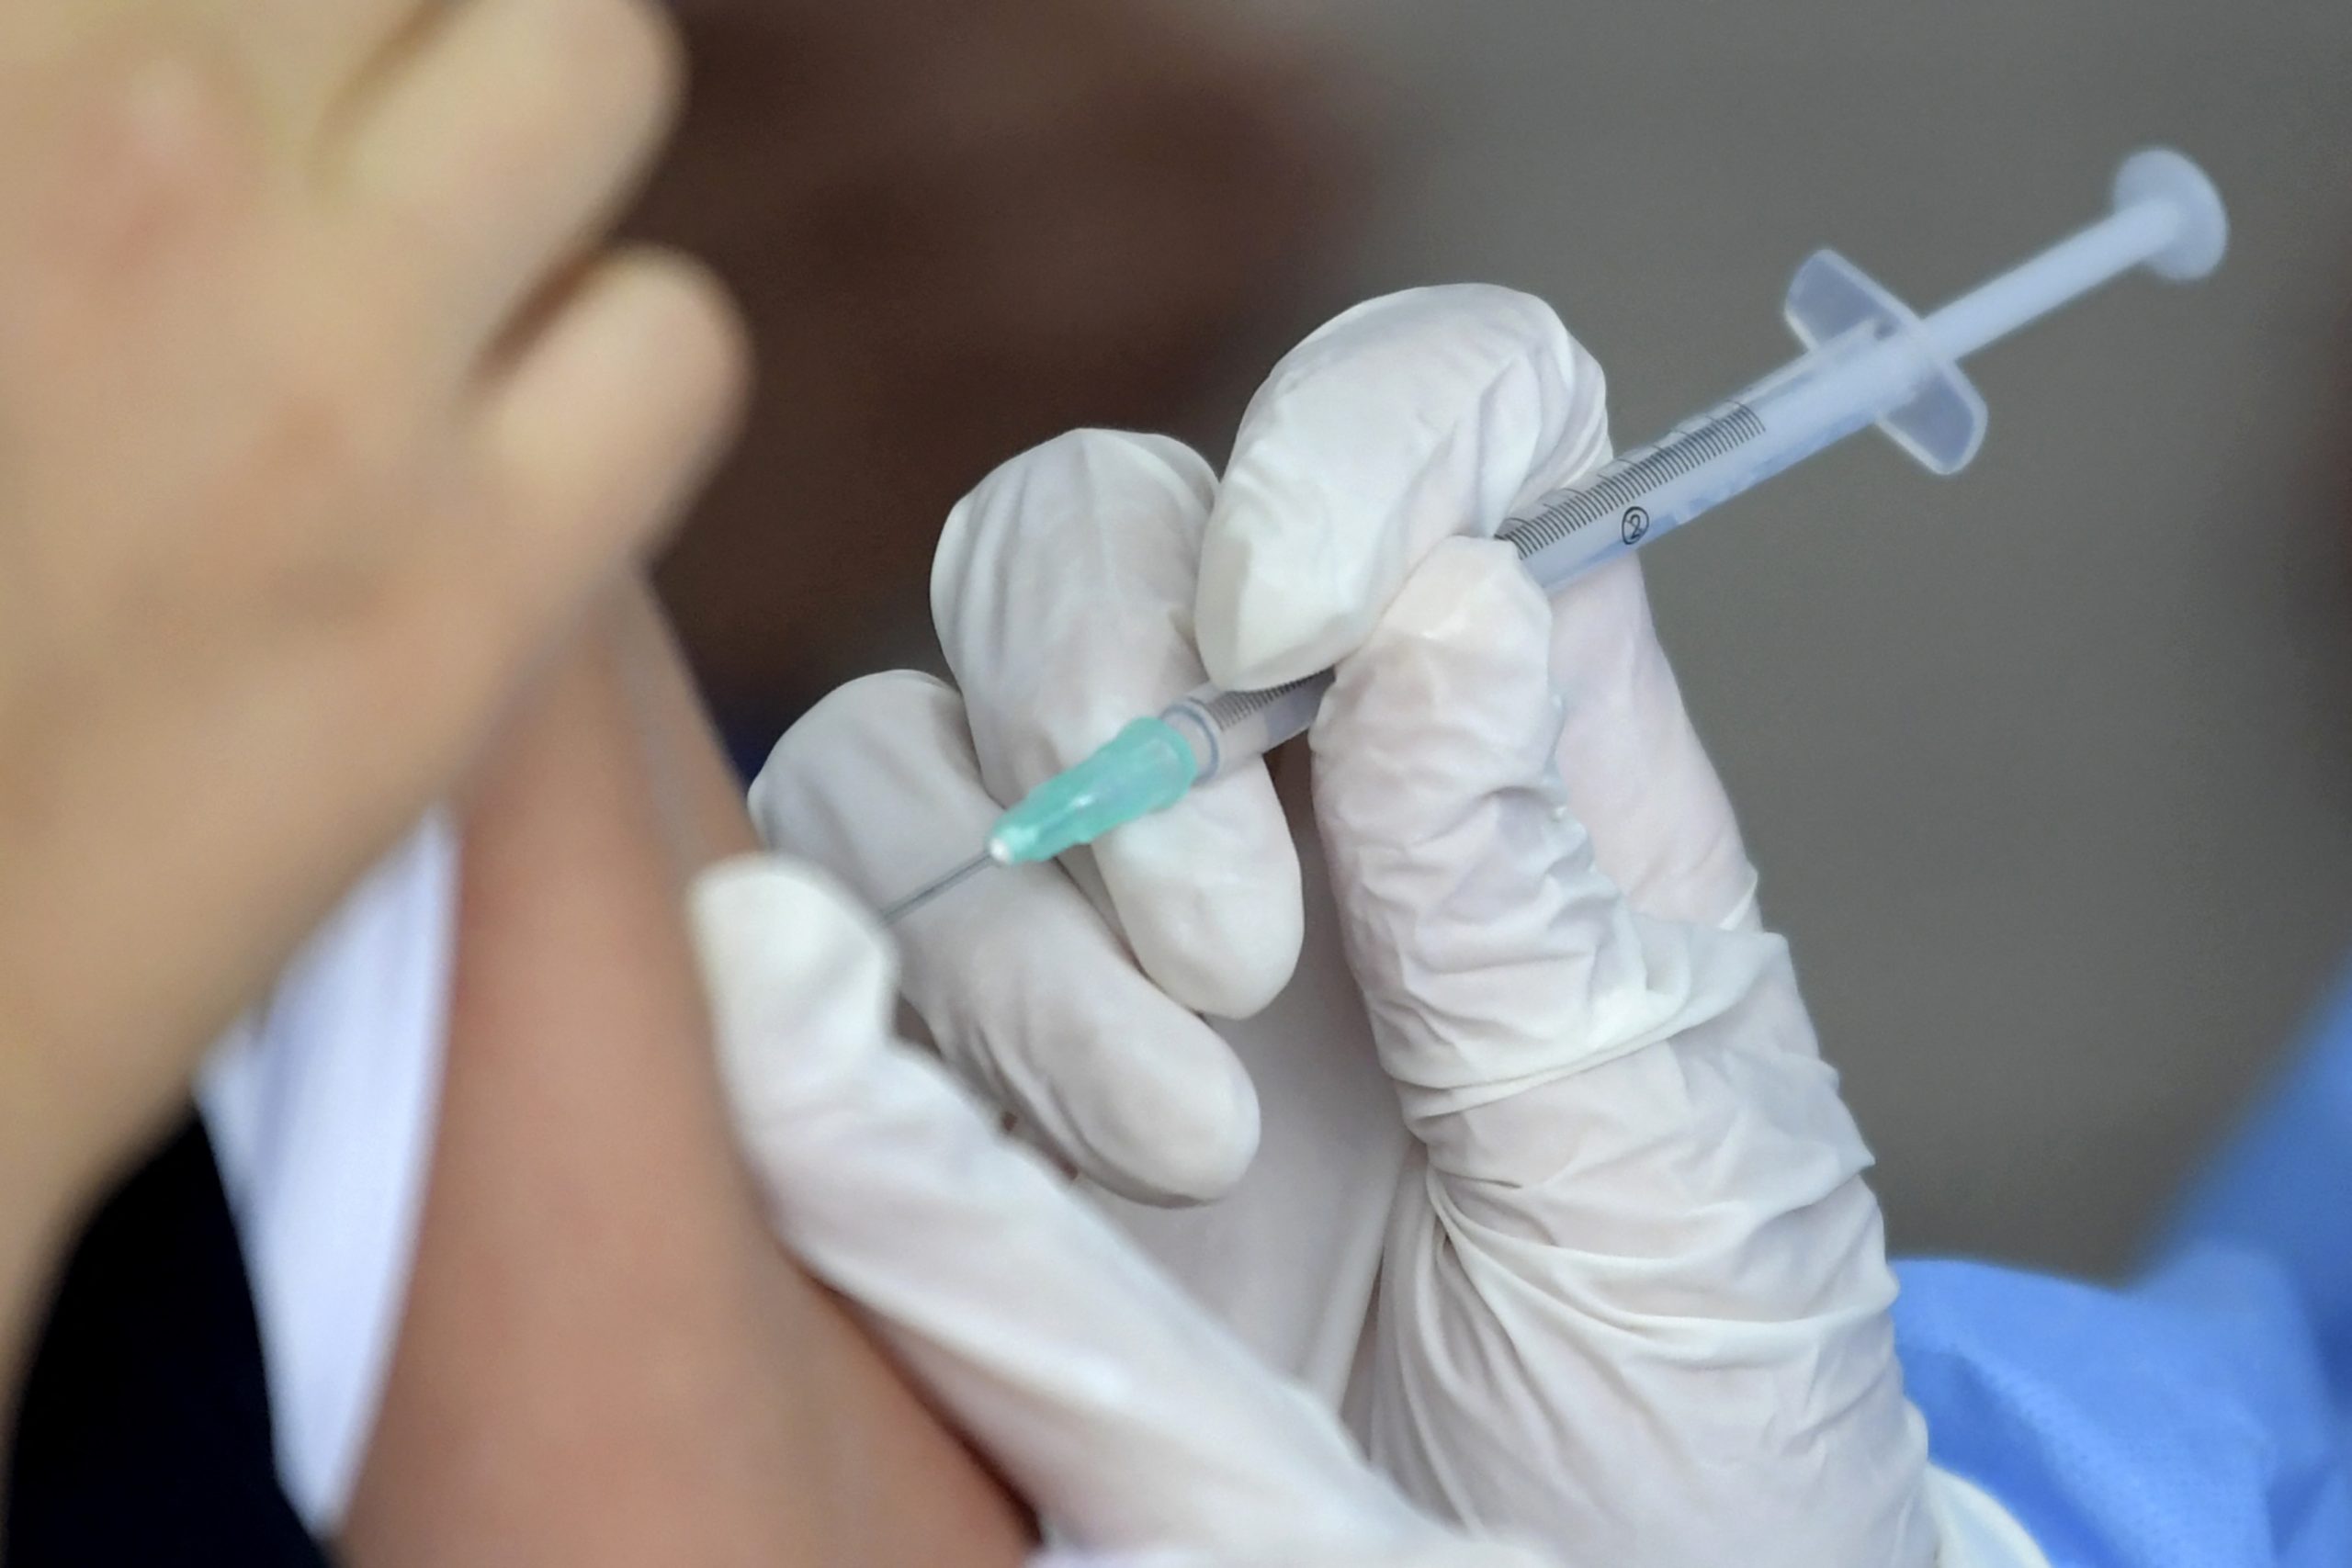 10 countries grab 75% of vaccines; 130 have not received a single dose